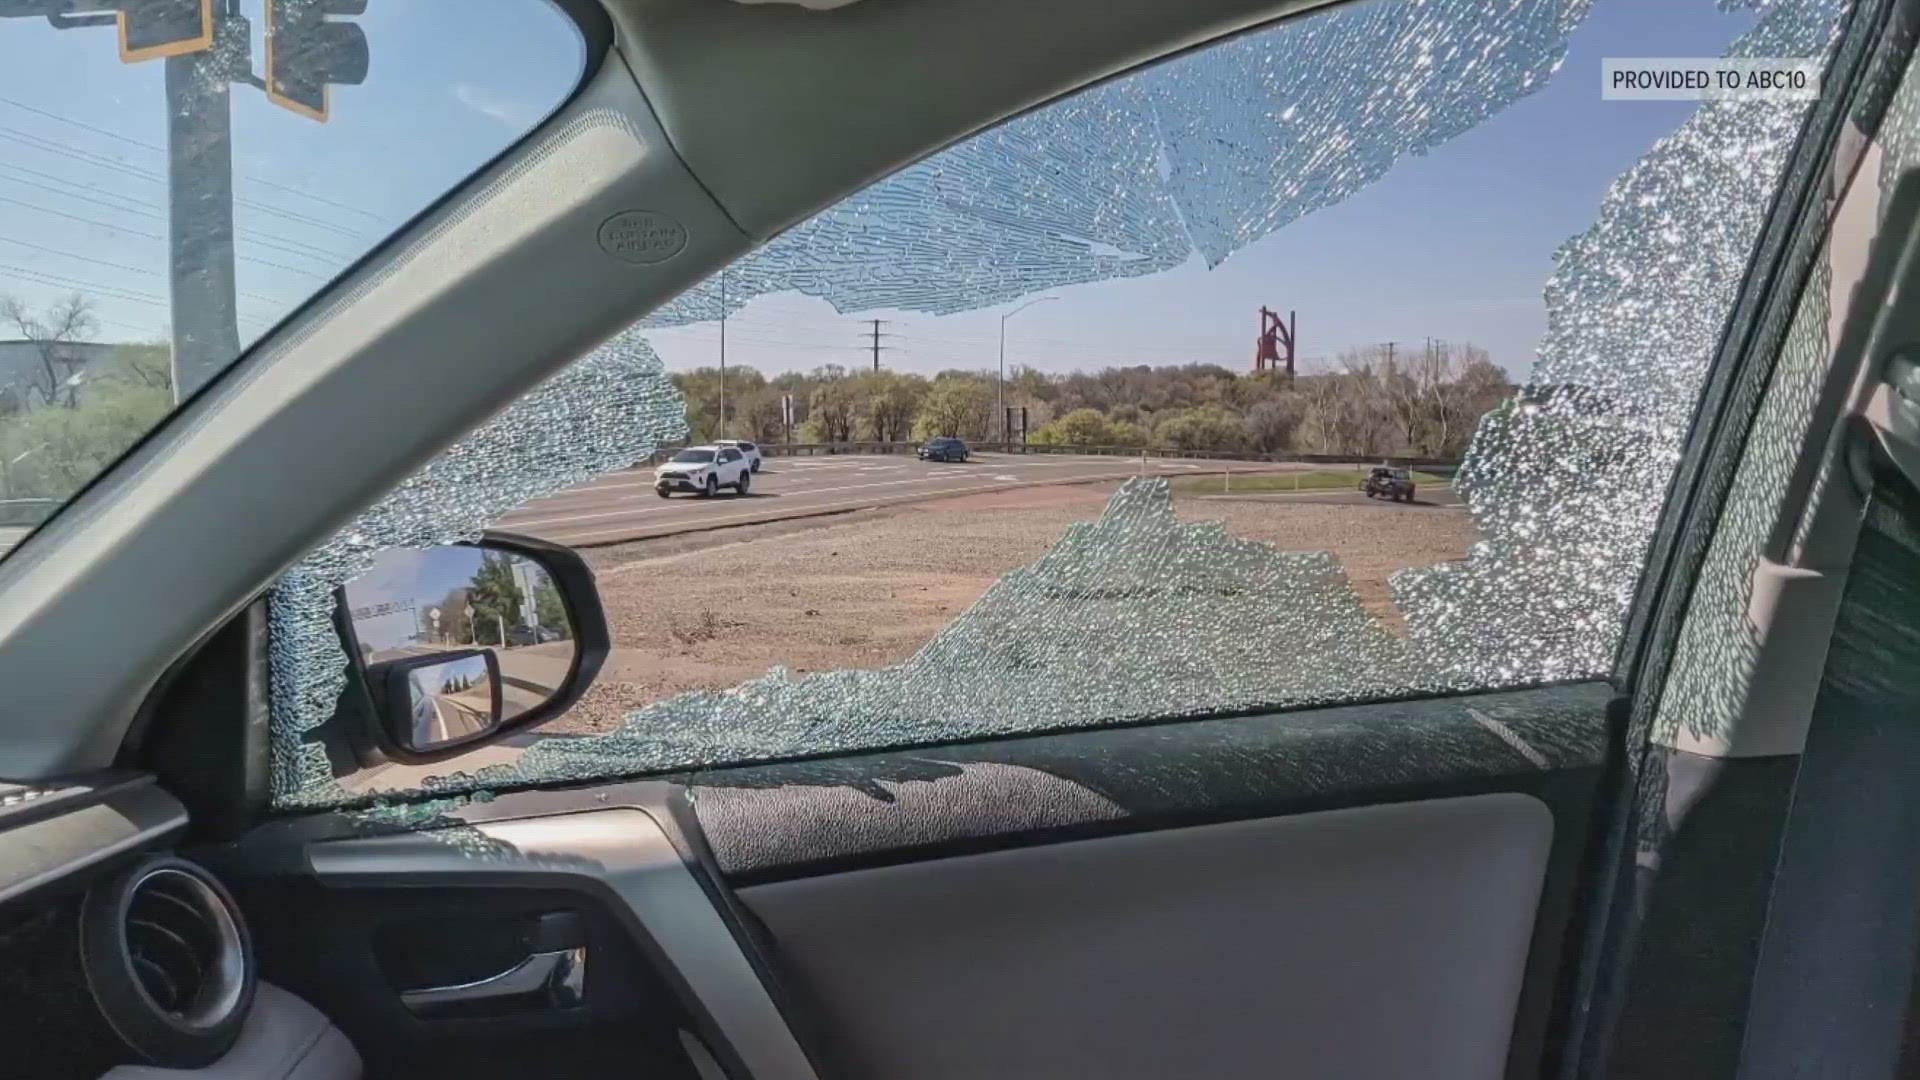 A growing number of people say their car windows were cracked traveling along a stretch Interstate 80 near the Atlantic exit.